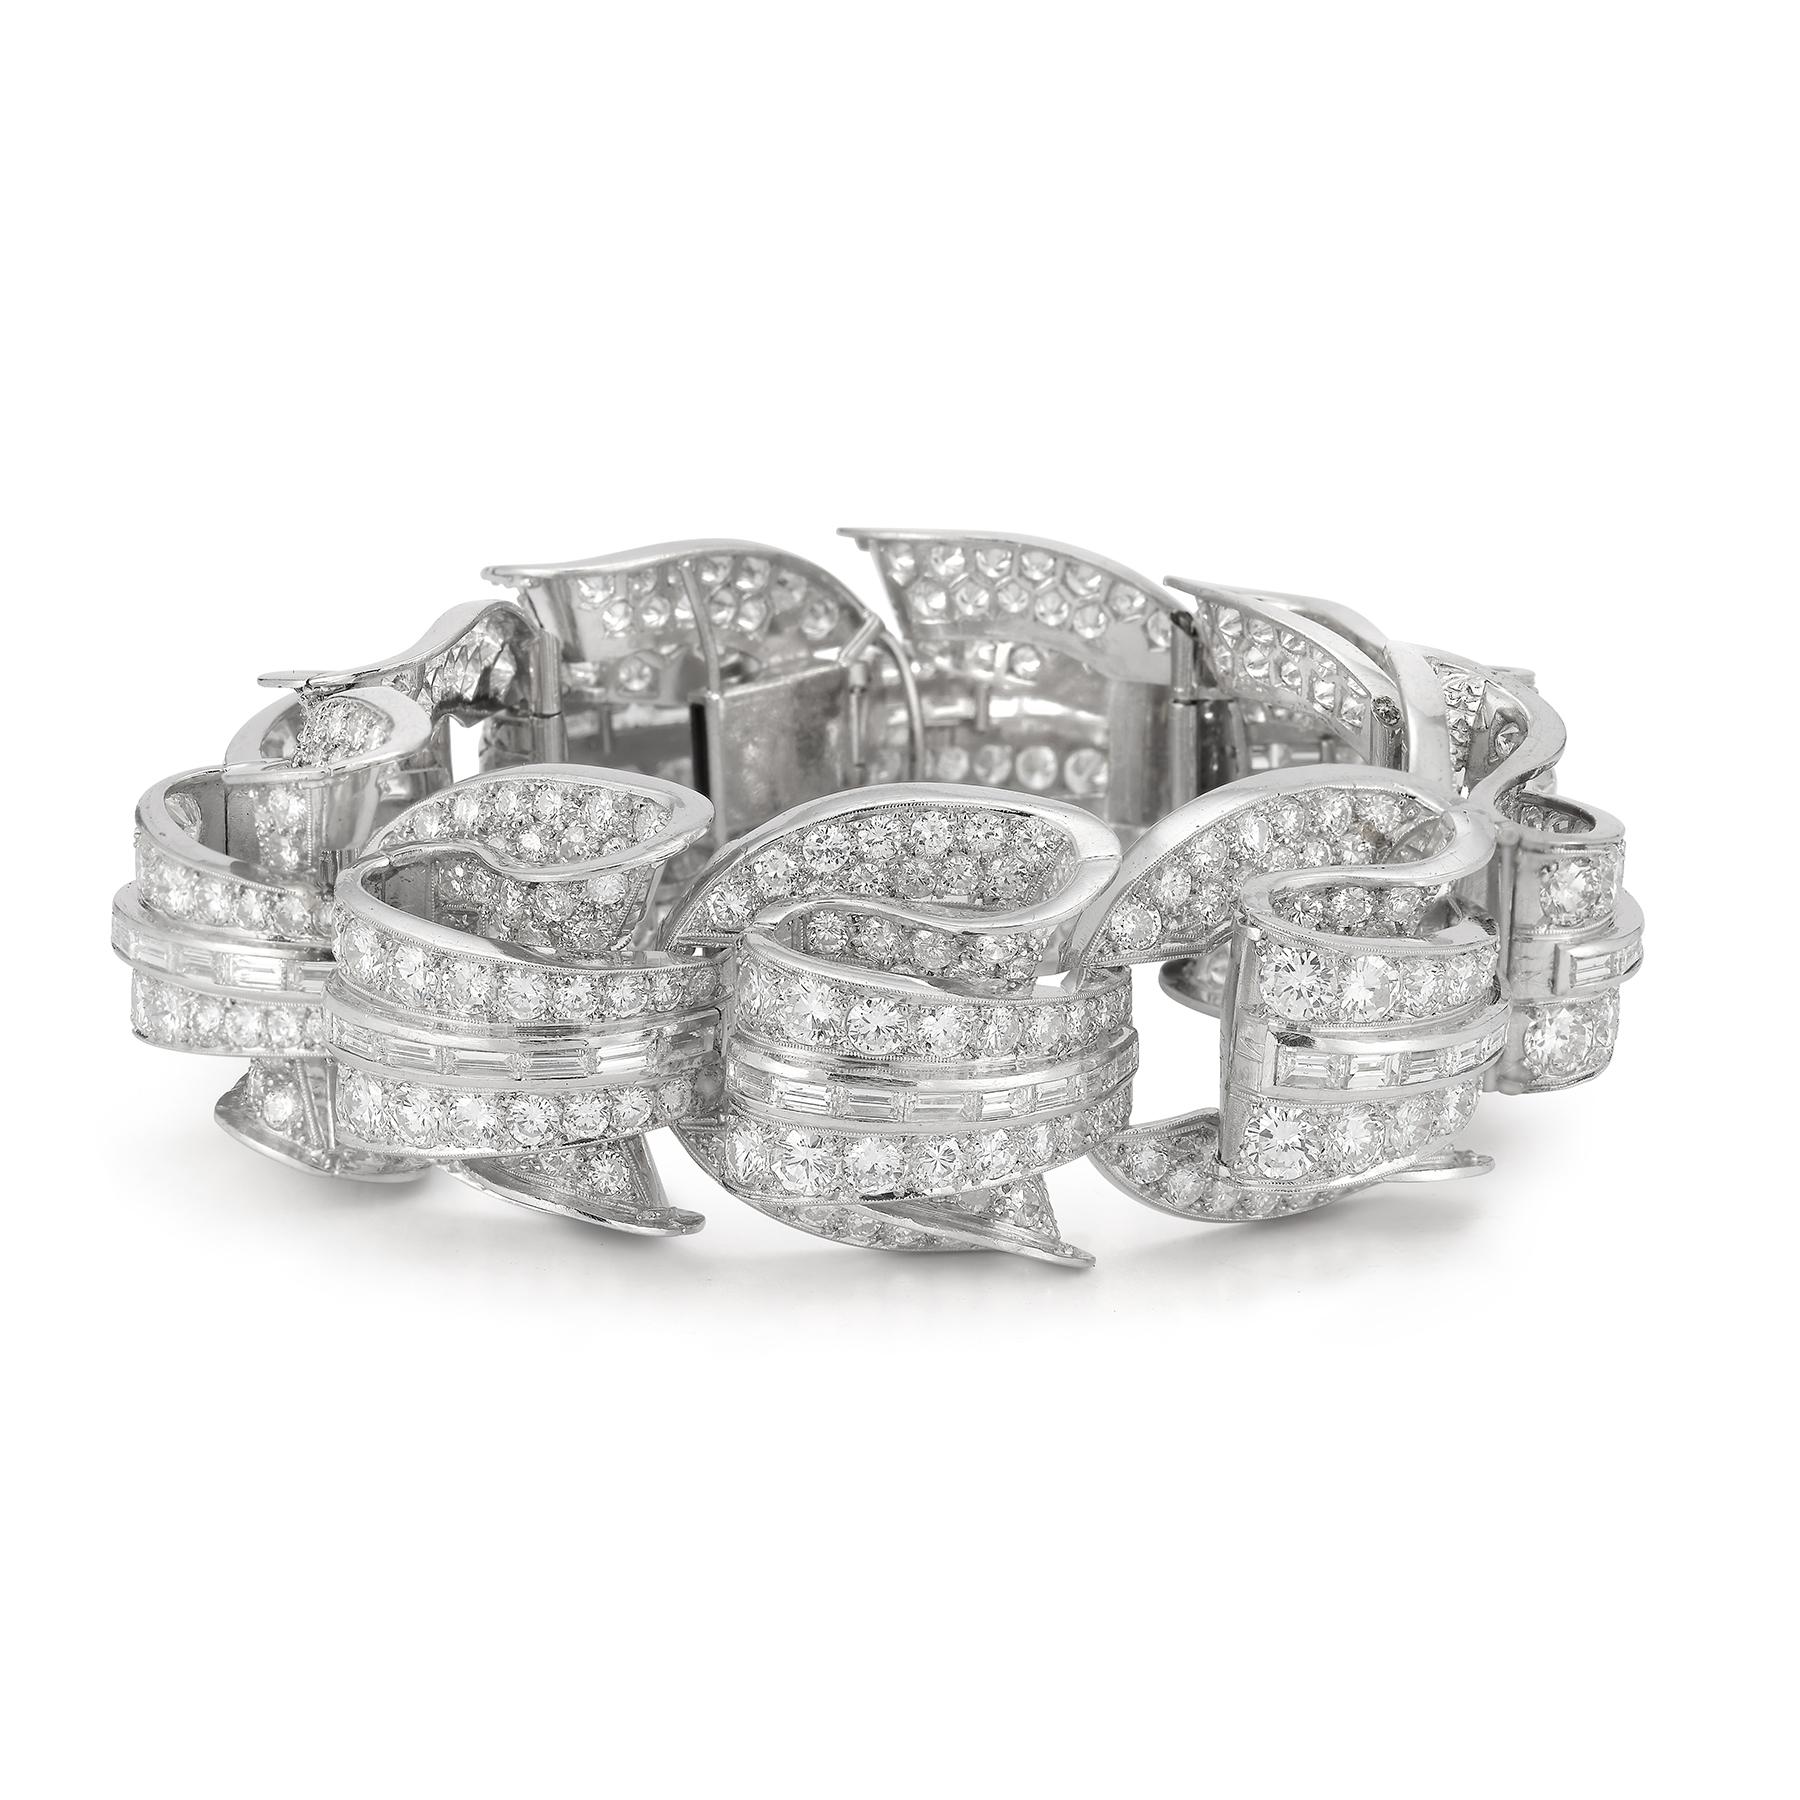 Incredible Geometric Art Deco Diamond Bracelet
Very geometric and three dimensional. A masterpiece of Art Deco design and Craftsmanship. 
Diamond Weight:  Approximately 40 carats
Measurements: 7